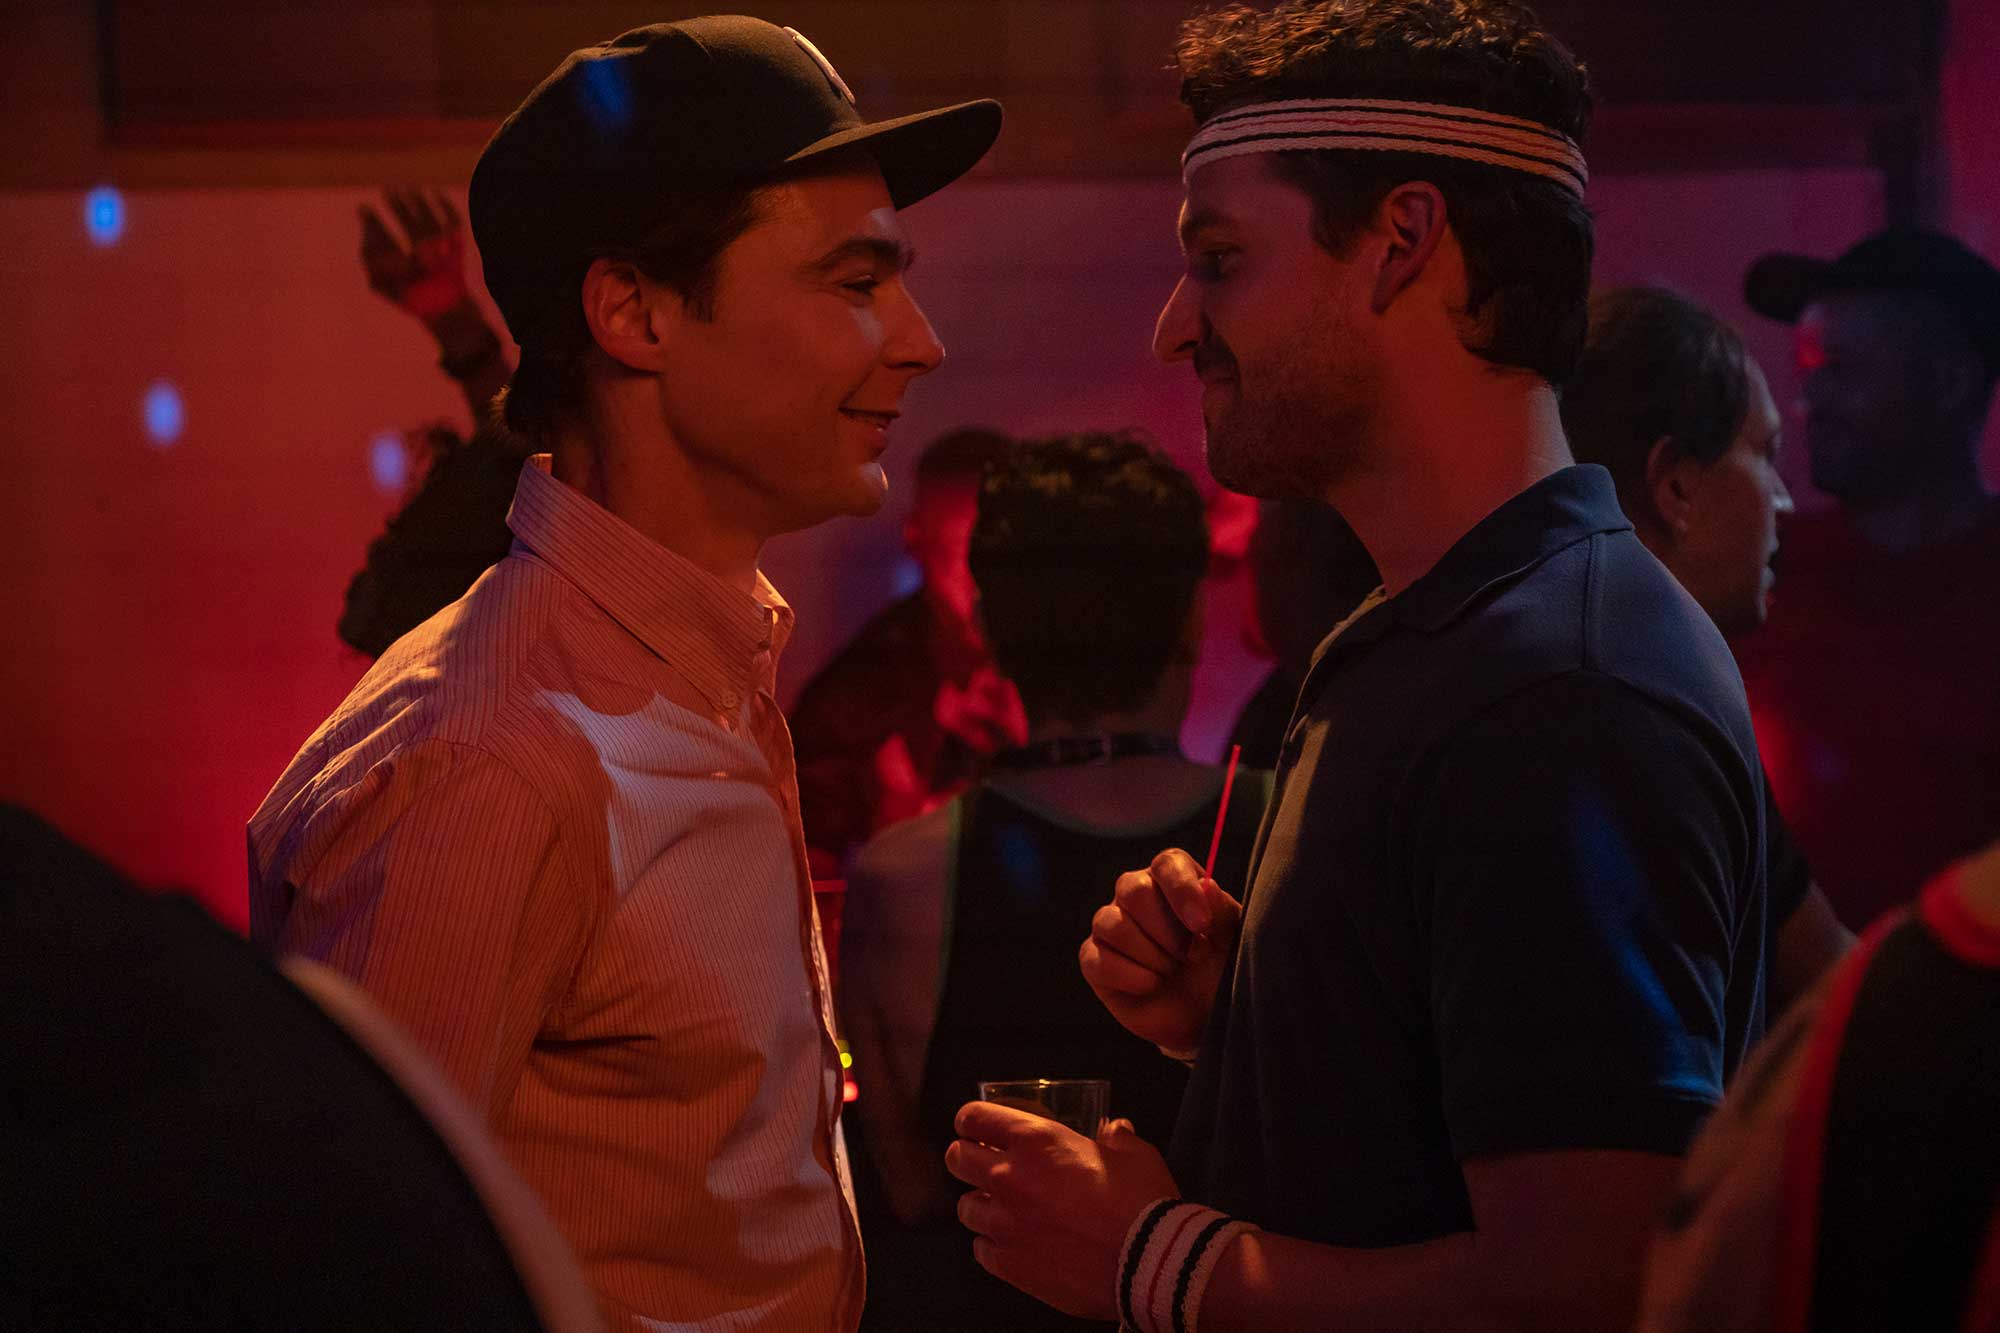 Two white men stand close and smile at each other in pink lit dance scene